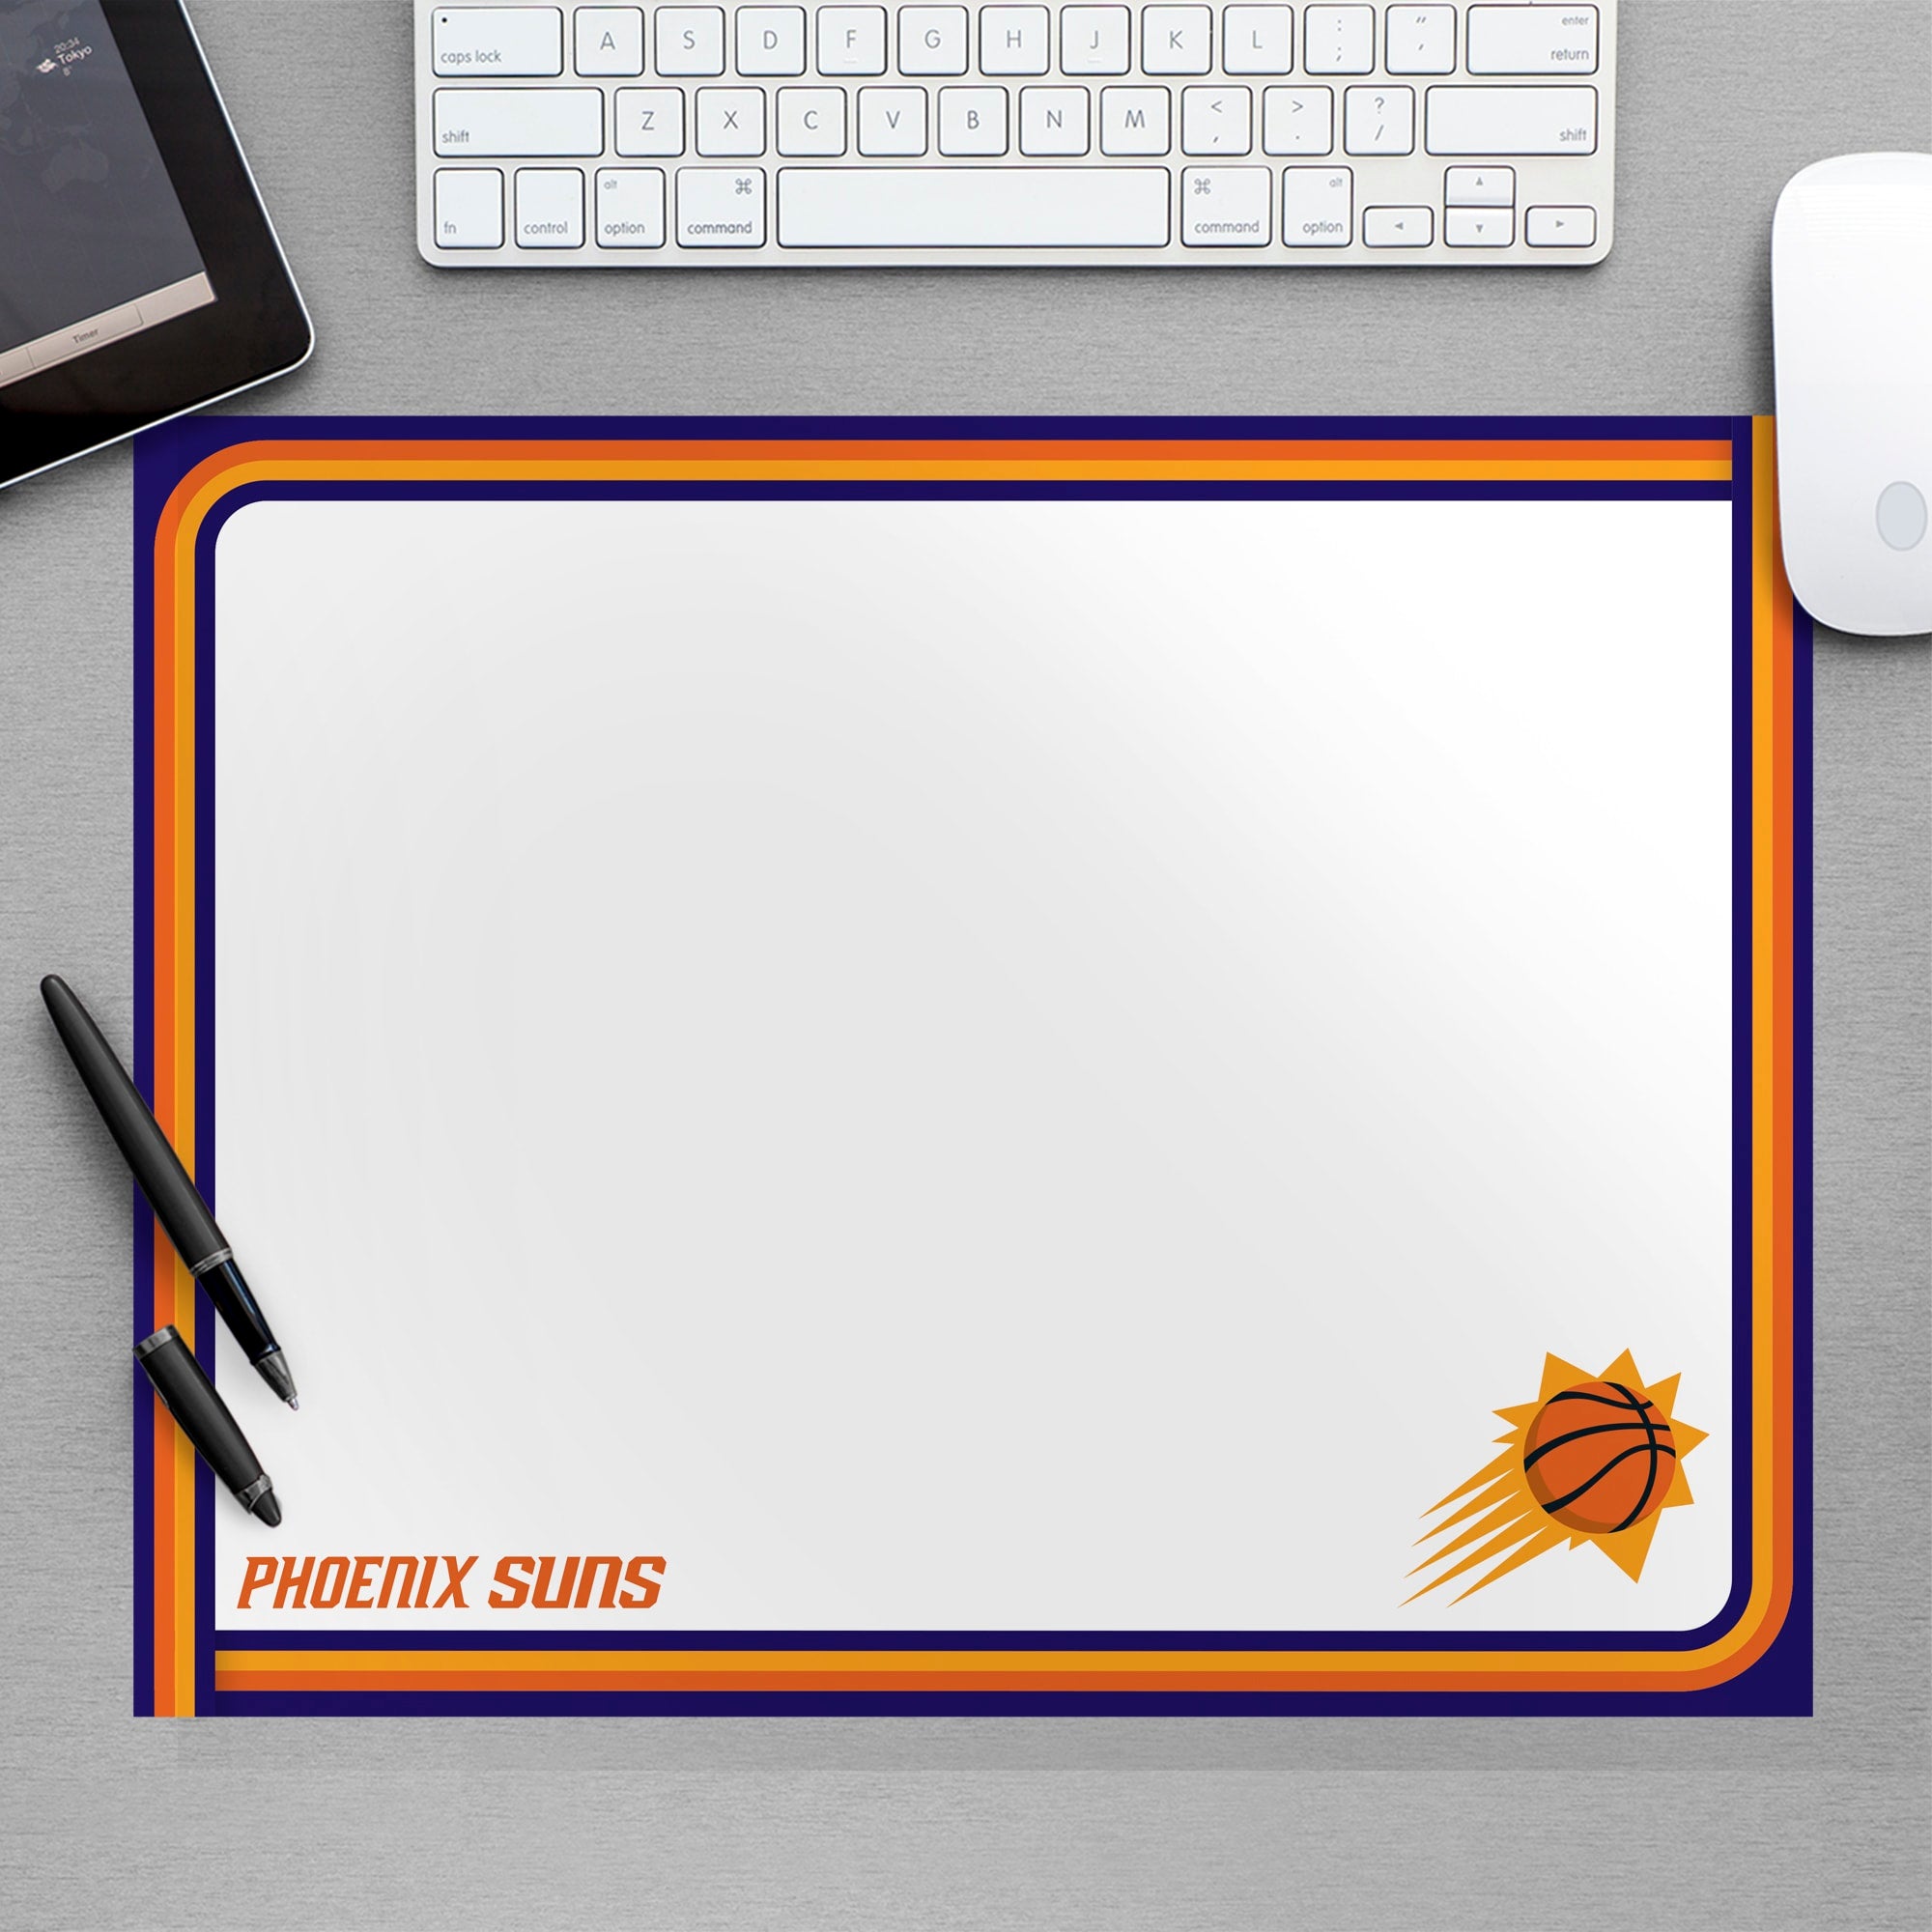 Phoenix Suns for Phoenix Suns: Dry Erase Whiteboard - Officially Licensed NBA Removable Wall Decal Large by Fathead | Vinyl